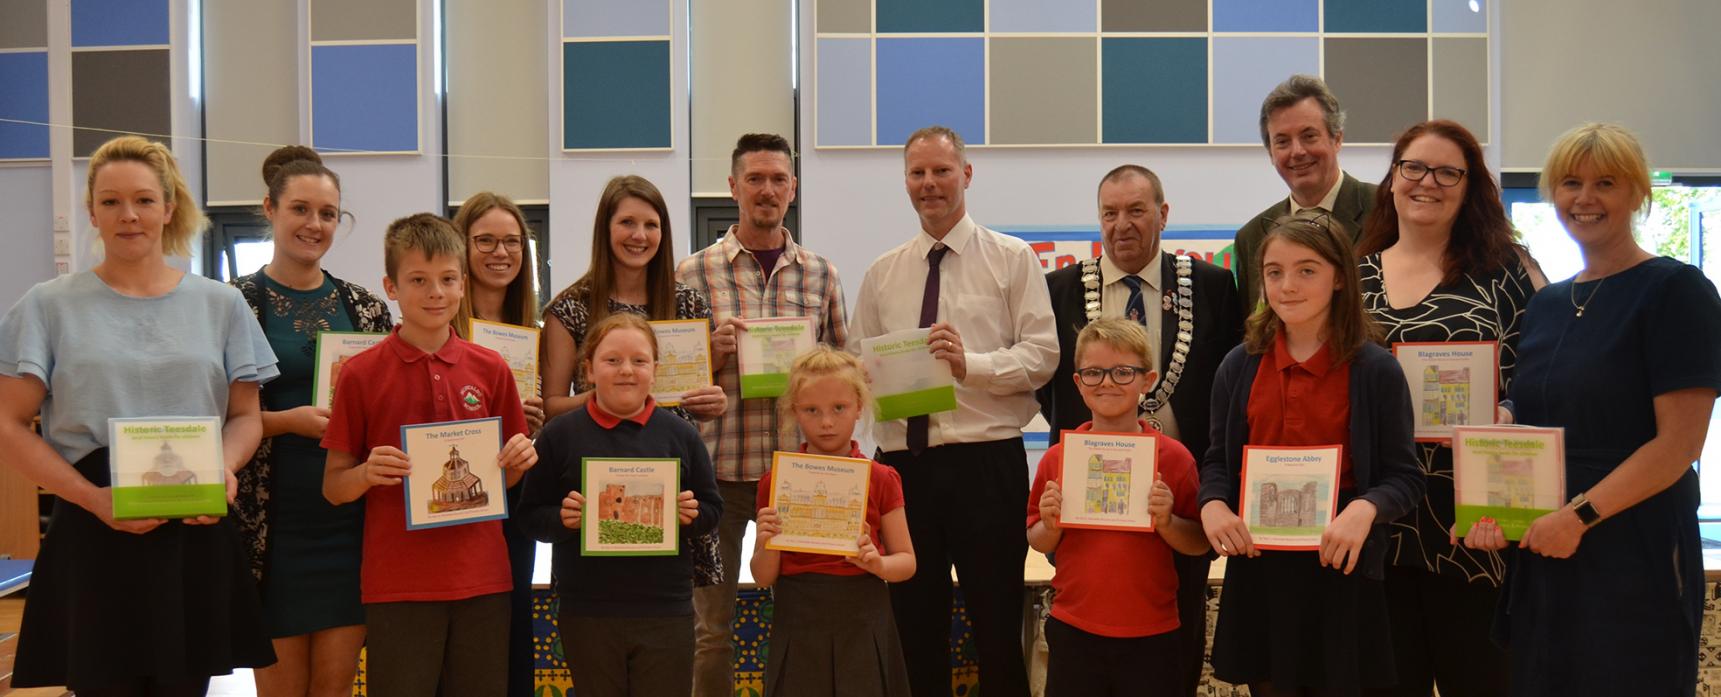 BOOK LAUNCH: Pupils and teachers at Montalbo Primary School at the launch of the new Teesdale history books with special guests